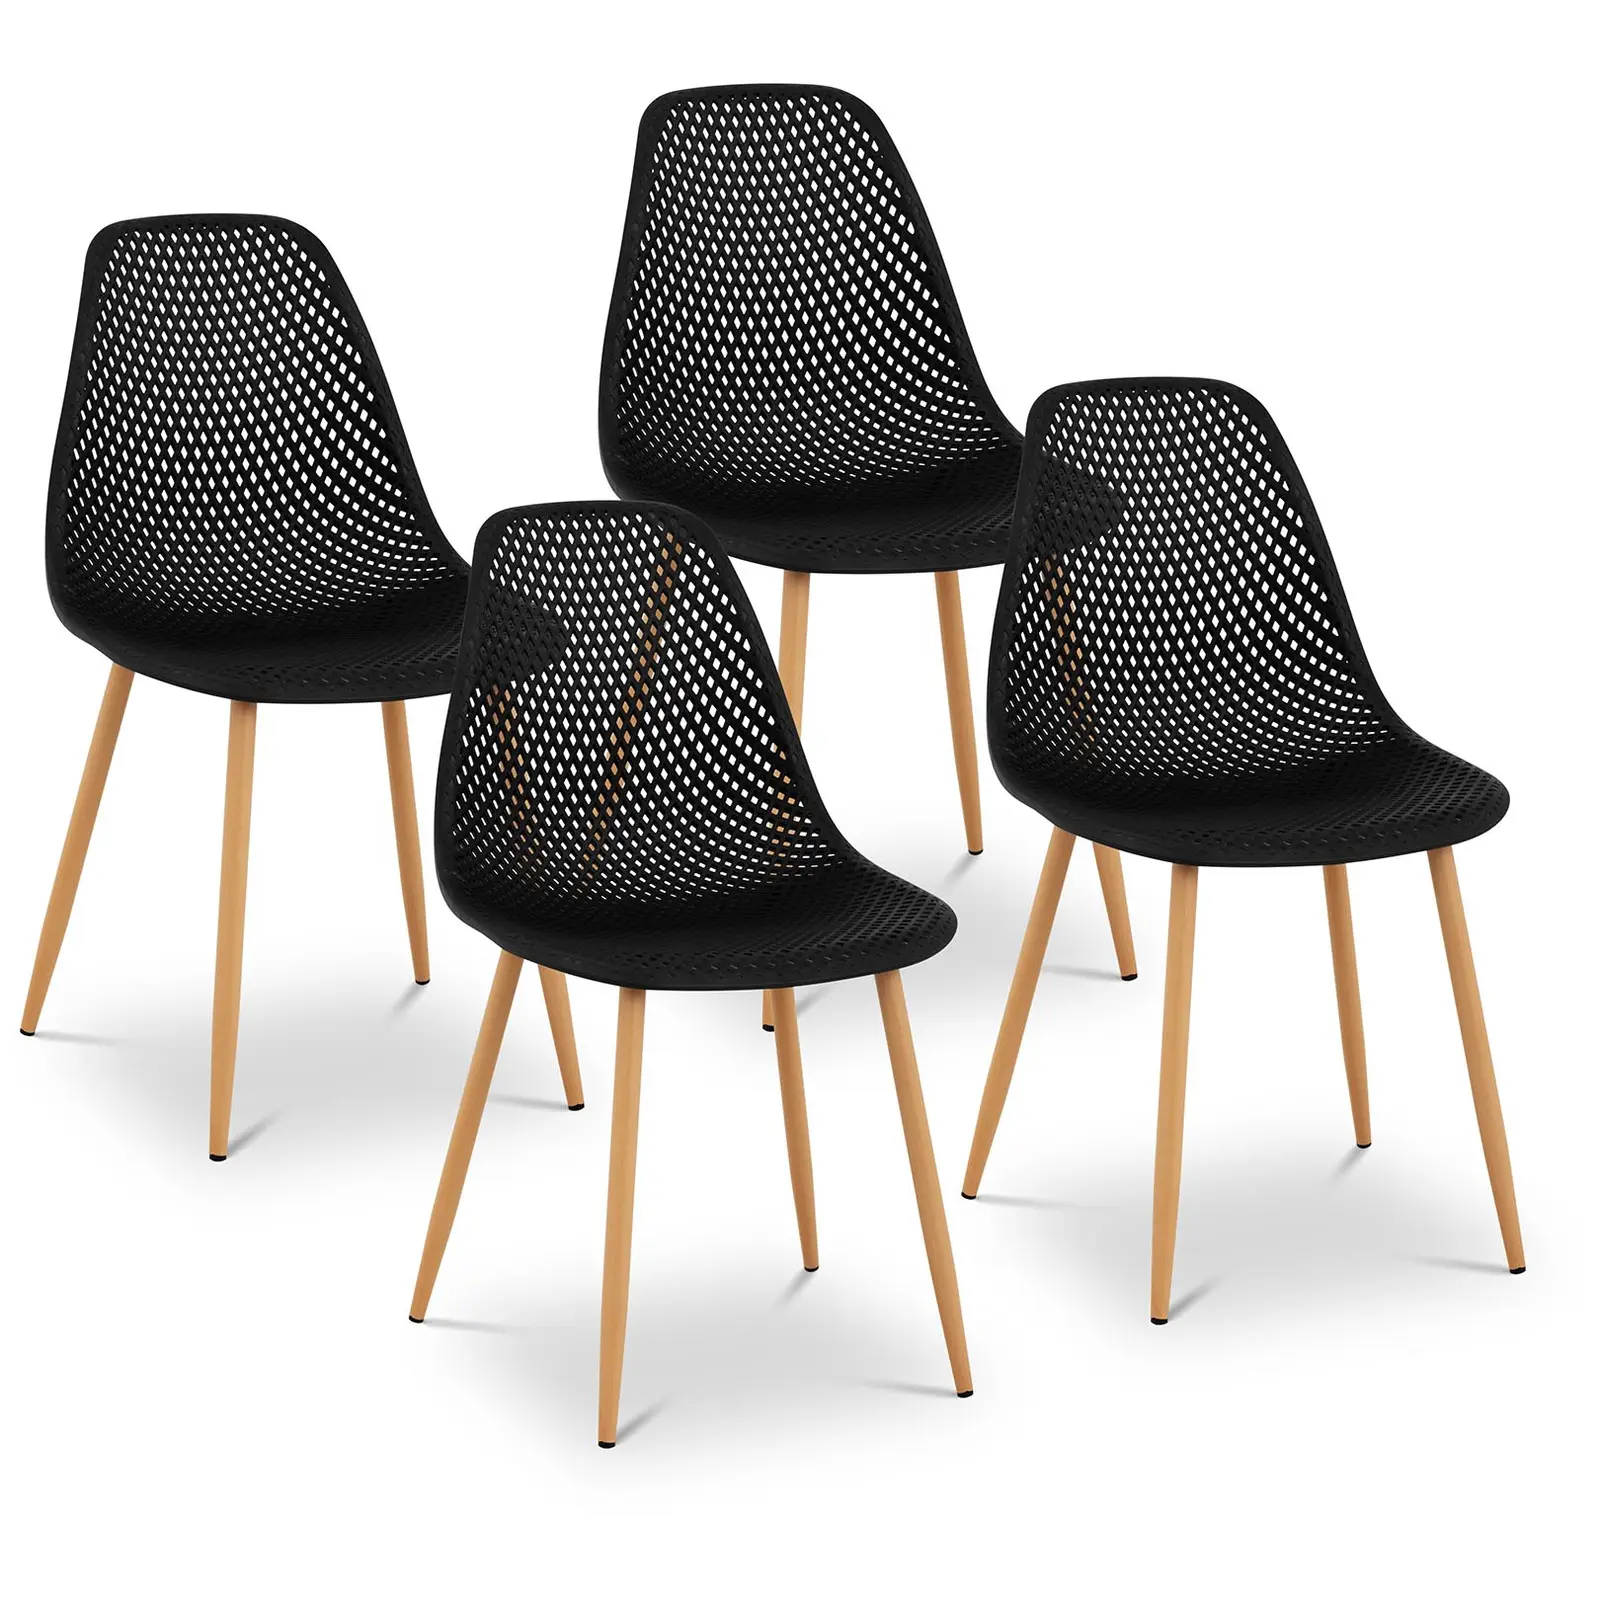 Chair - set of 4 - up to 150 kg - seat 52 x 46.5 cm - black